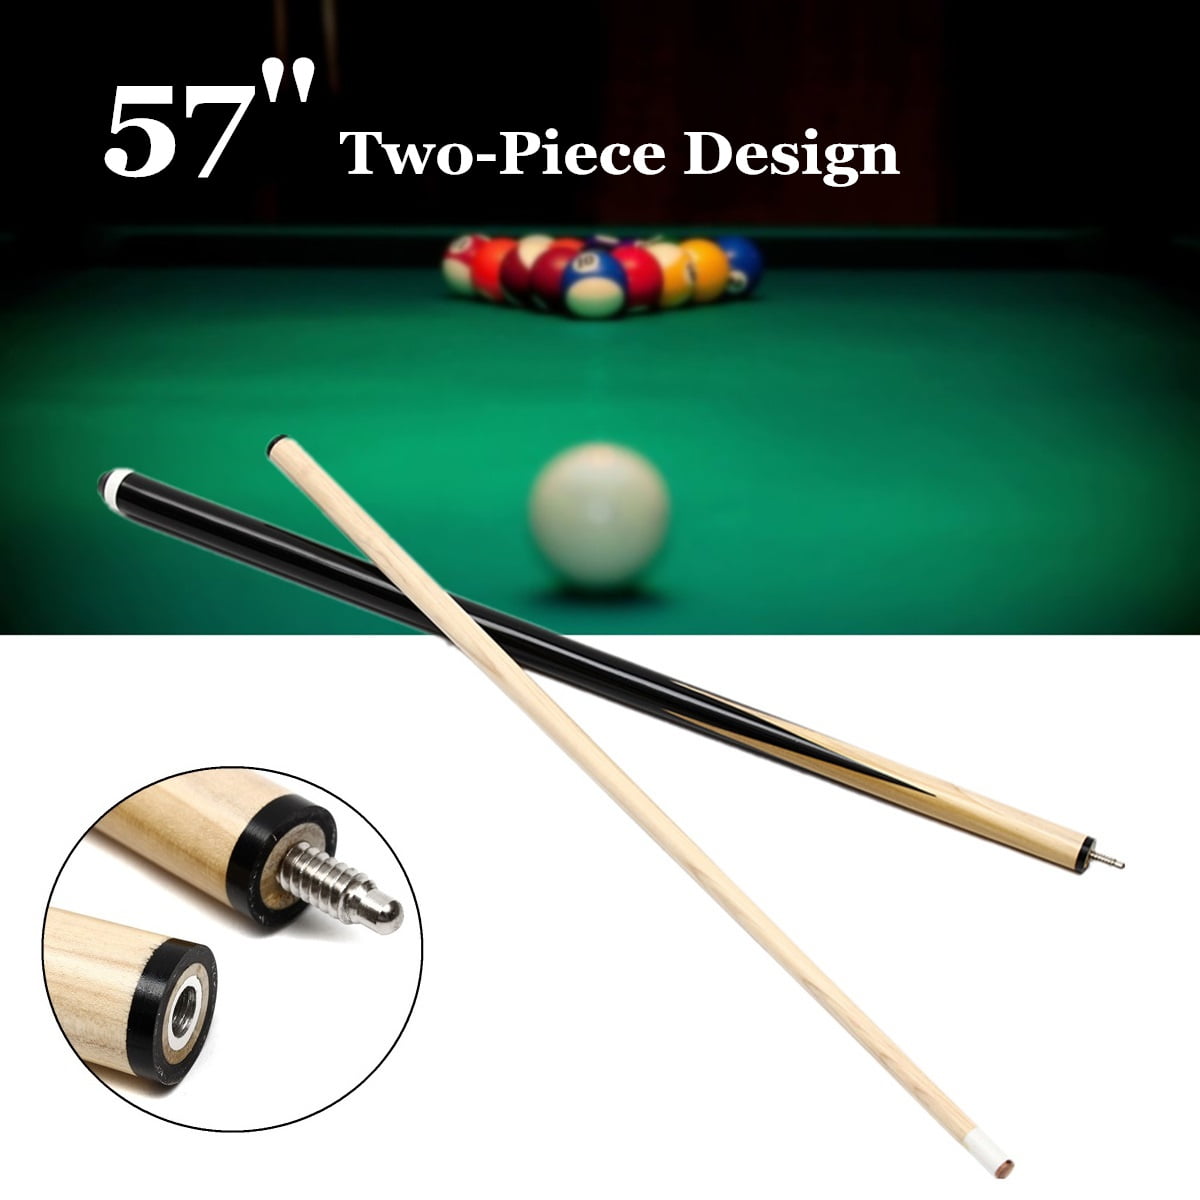 Details about   Set of Pool Cues 57 Inch Billiard House Bar Cue Sticks Two-Piece Pool Cues